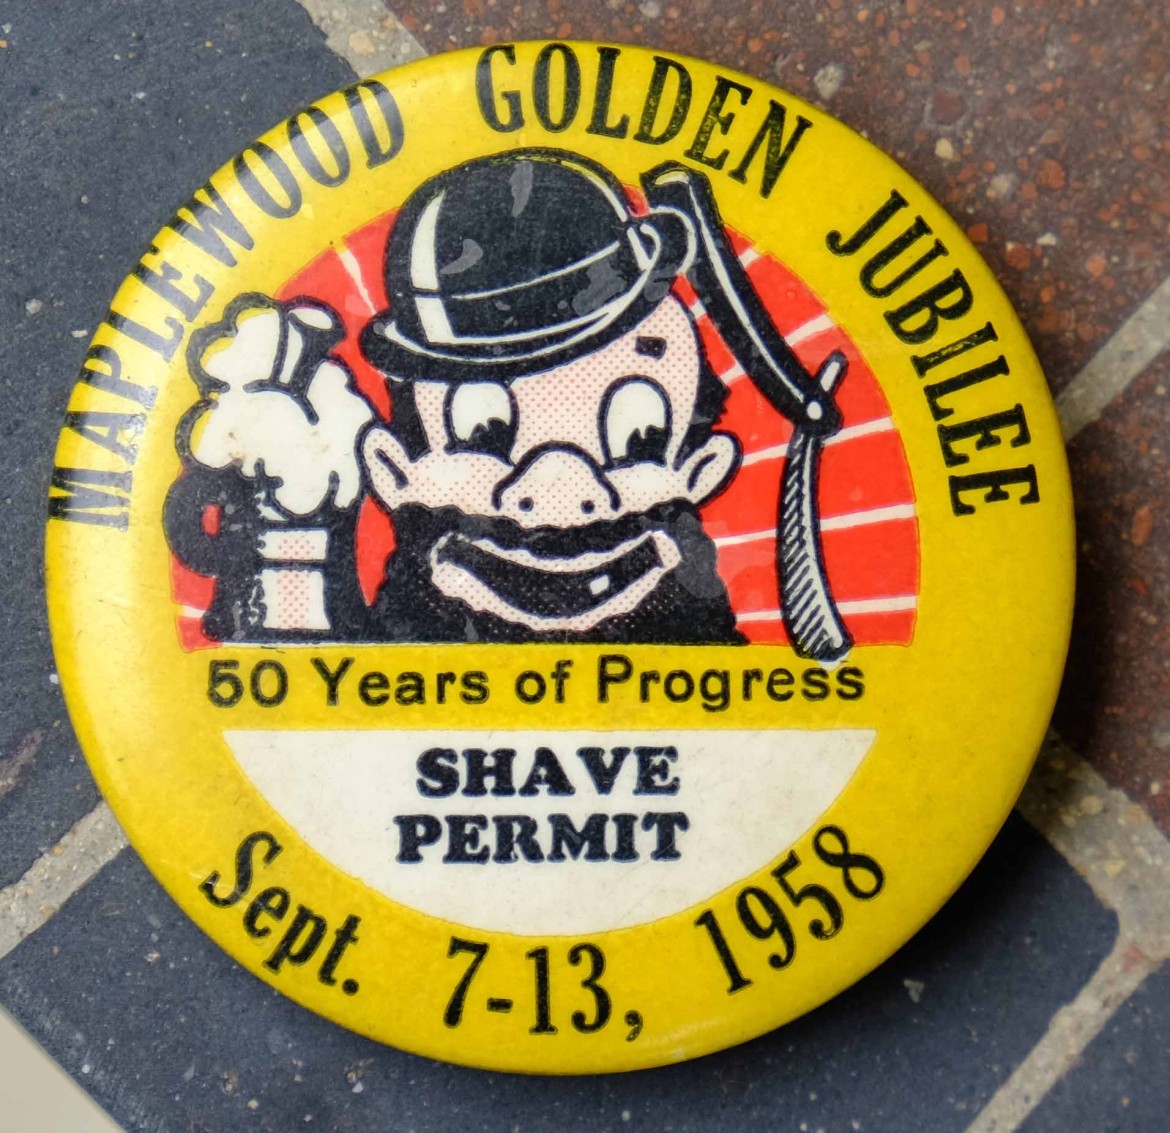 Marty has a large collection of Maplewoodiana. He let me photograph several examples like this button from the 50th anniversary of our town.